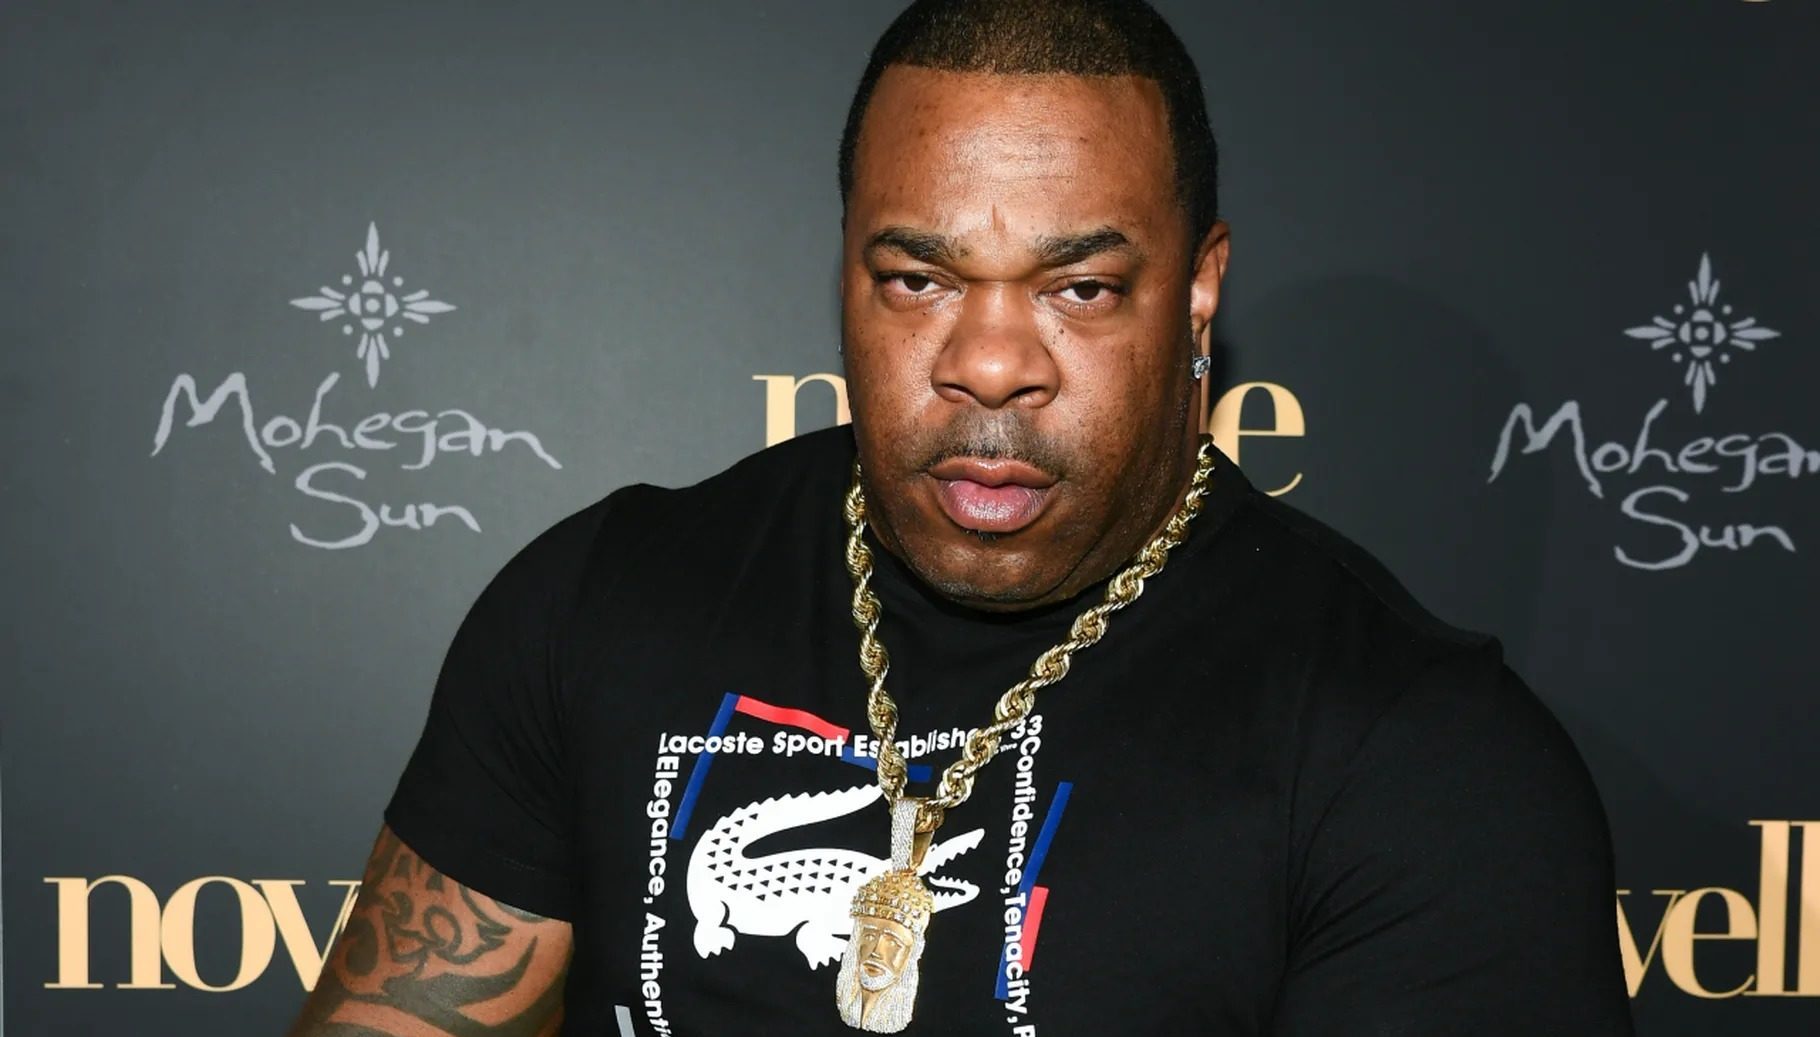 Busta Rhymes has completed a new album and previewed new music